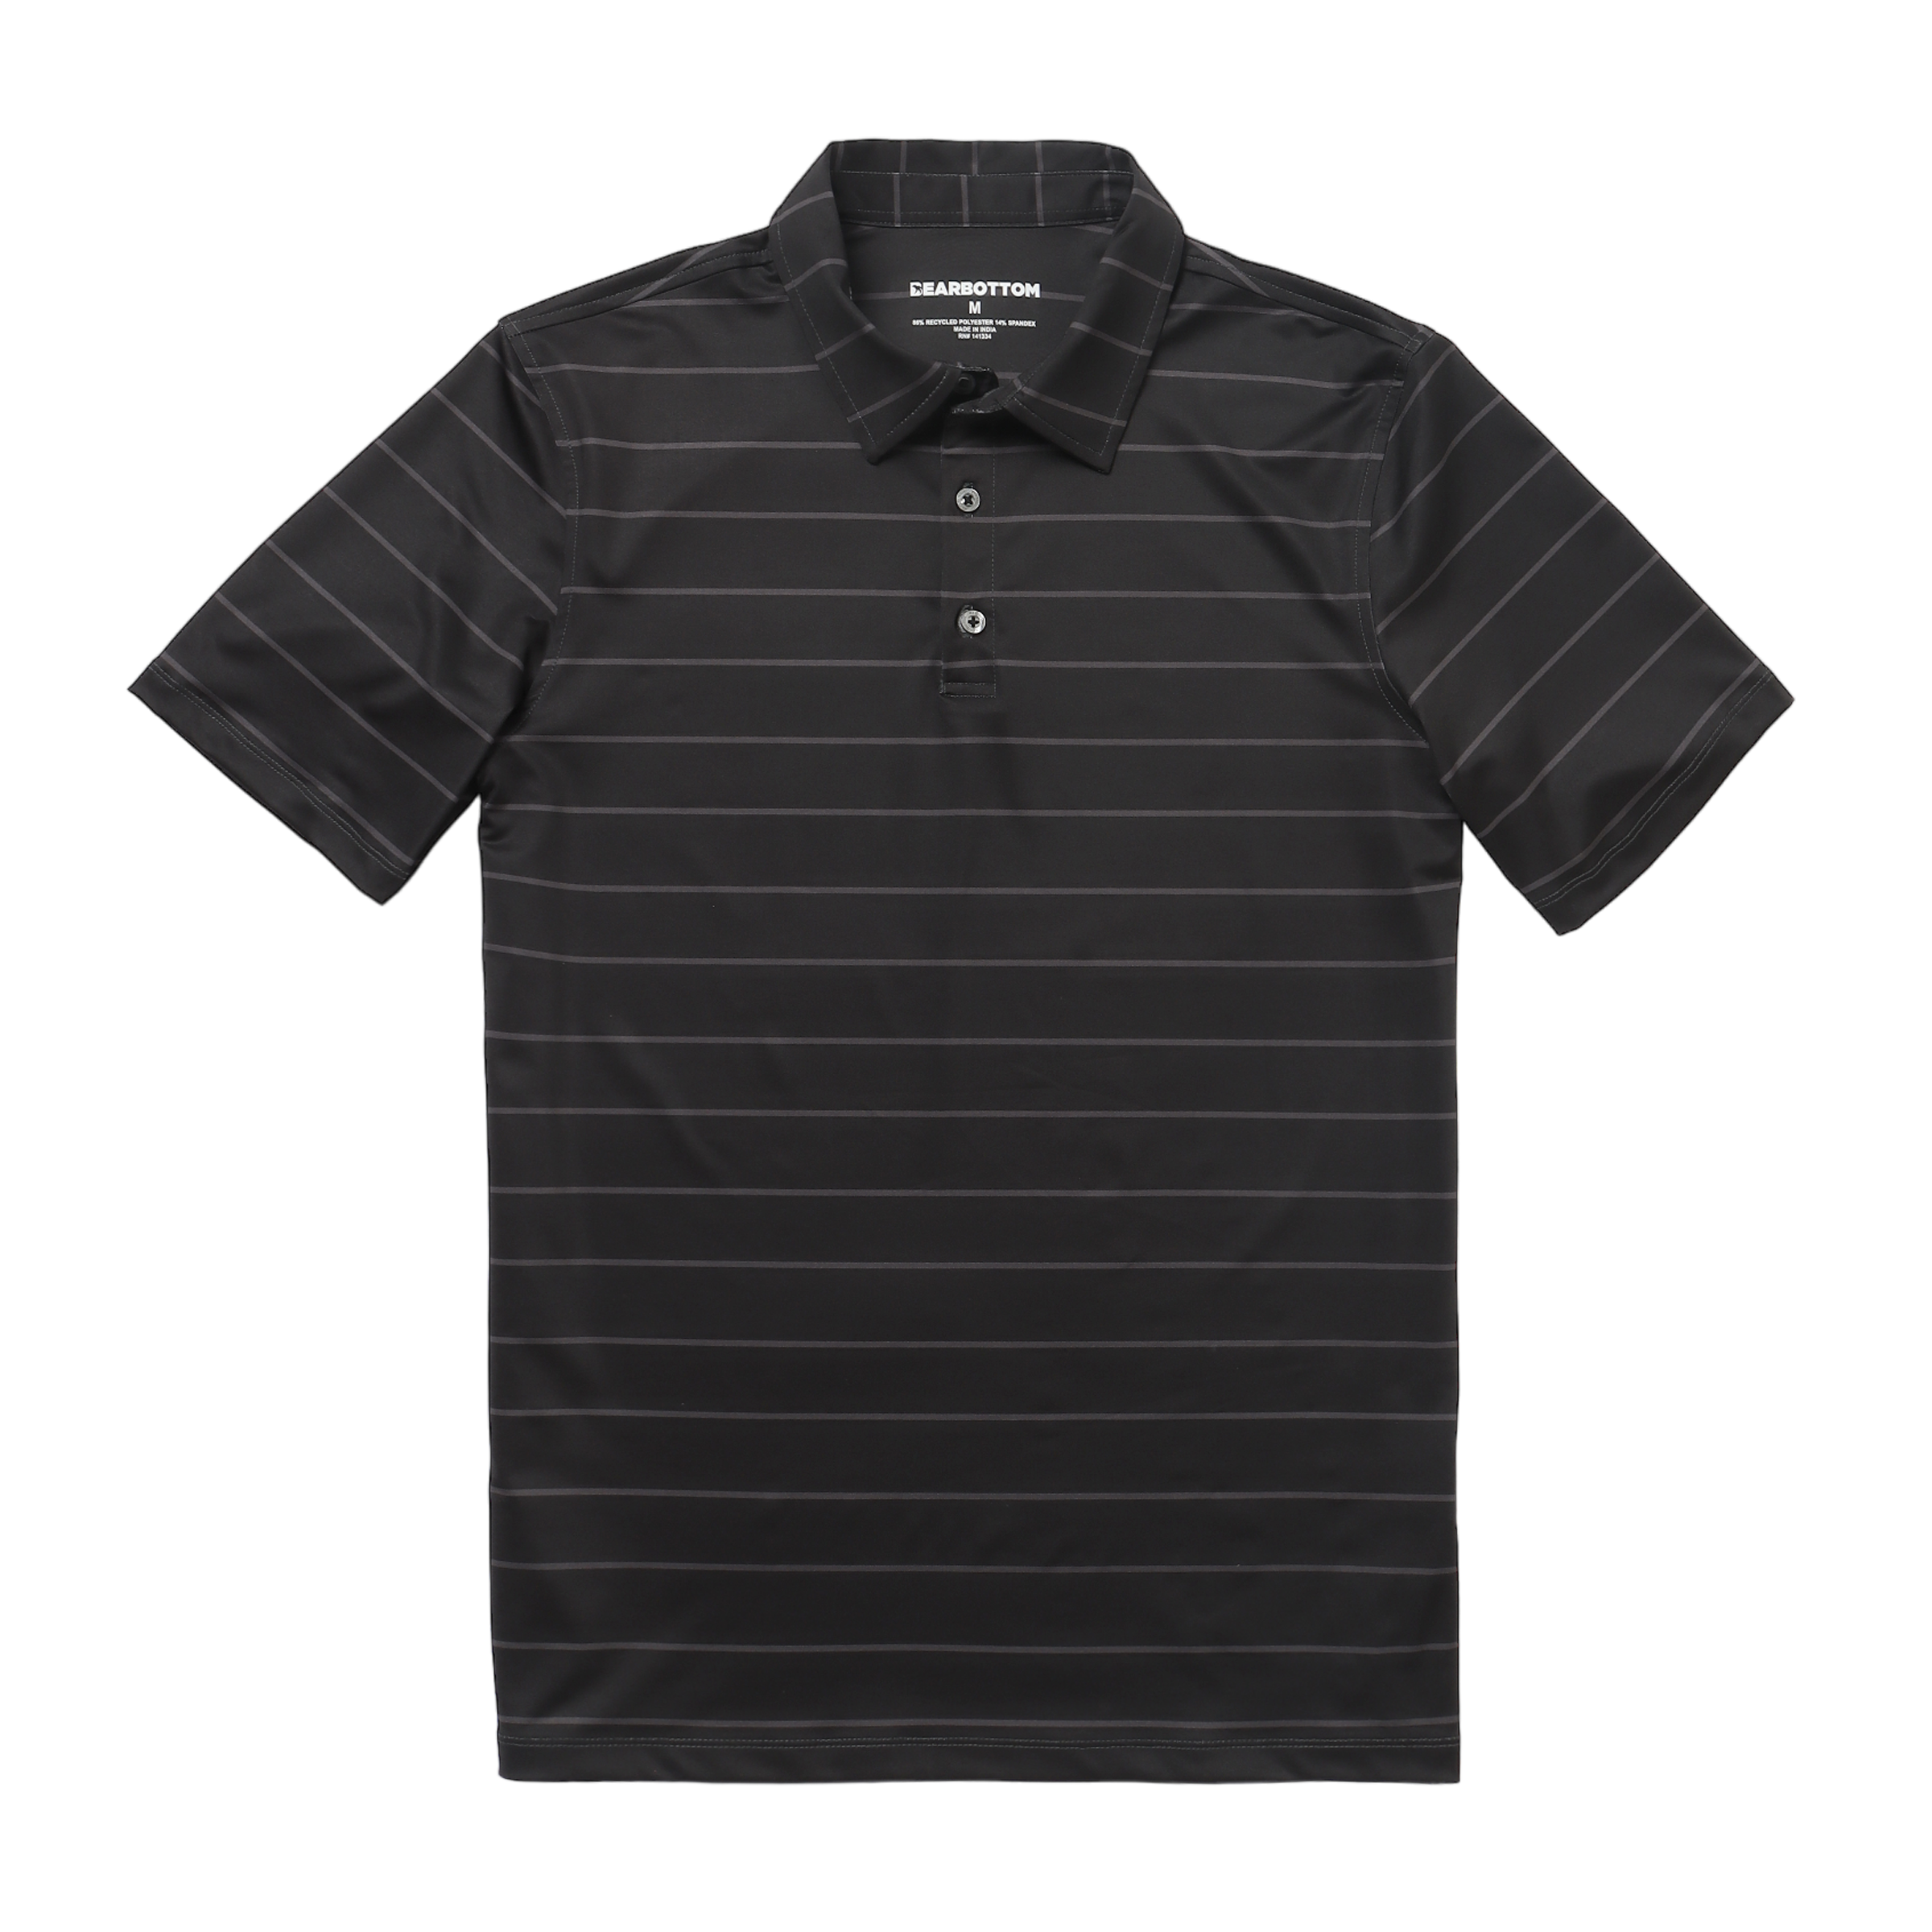 Performance Stripe Polo Shadow Stripe front with collar, short sleeves, and 3 buttons